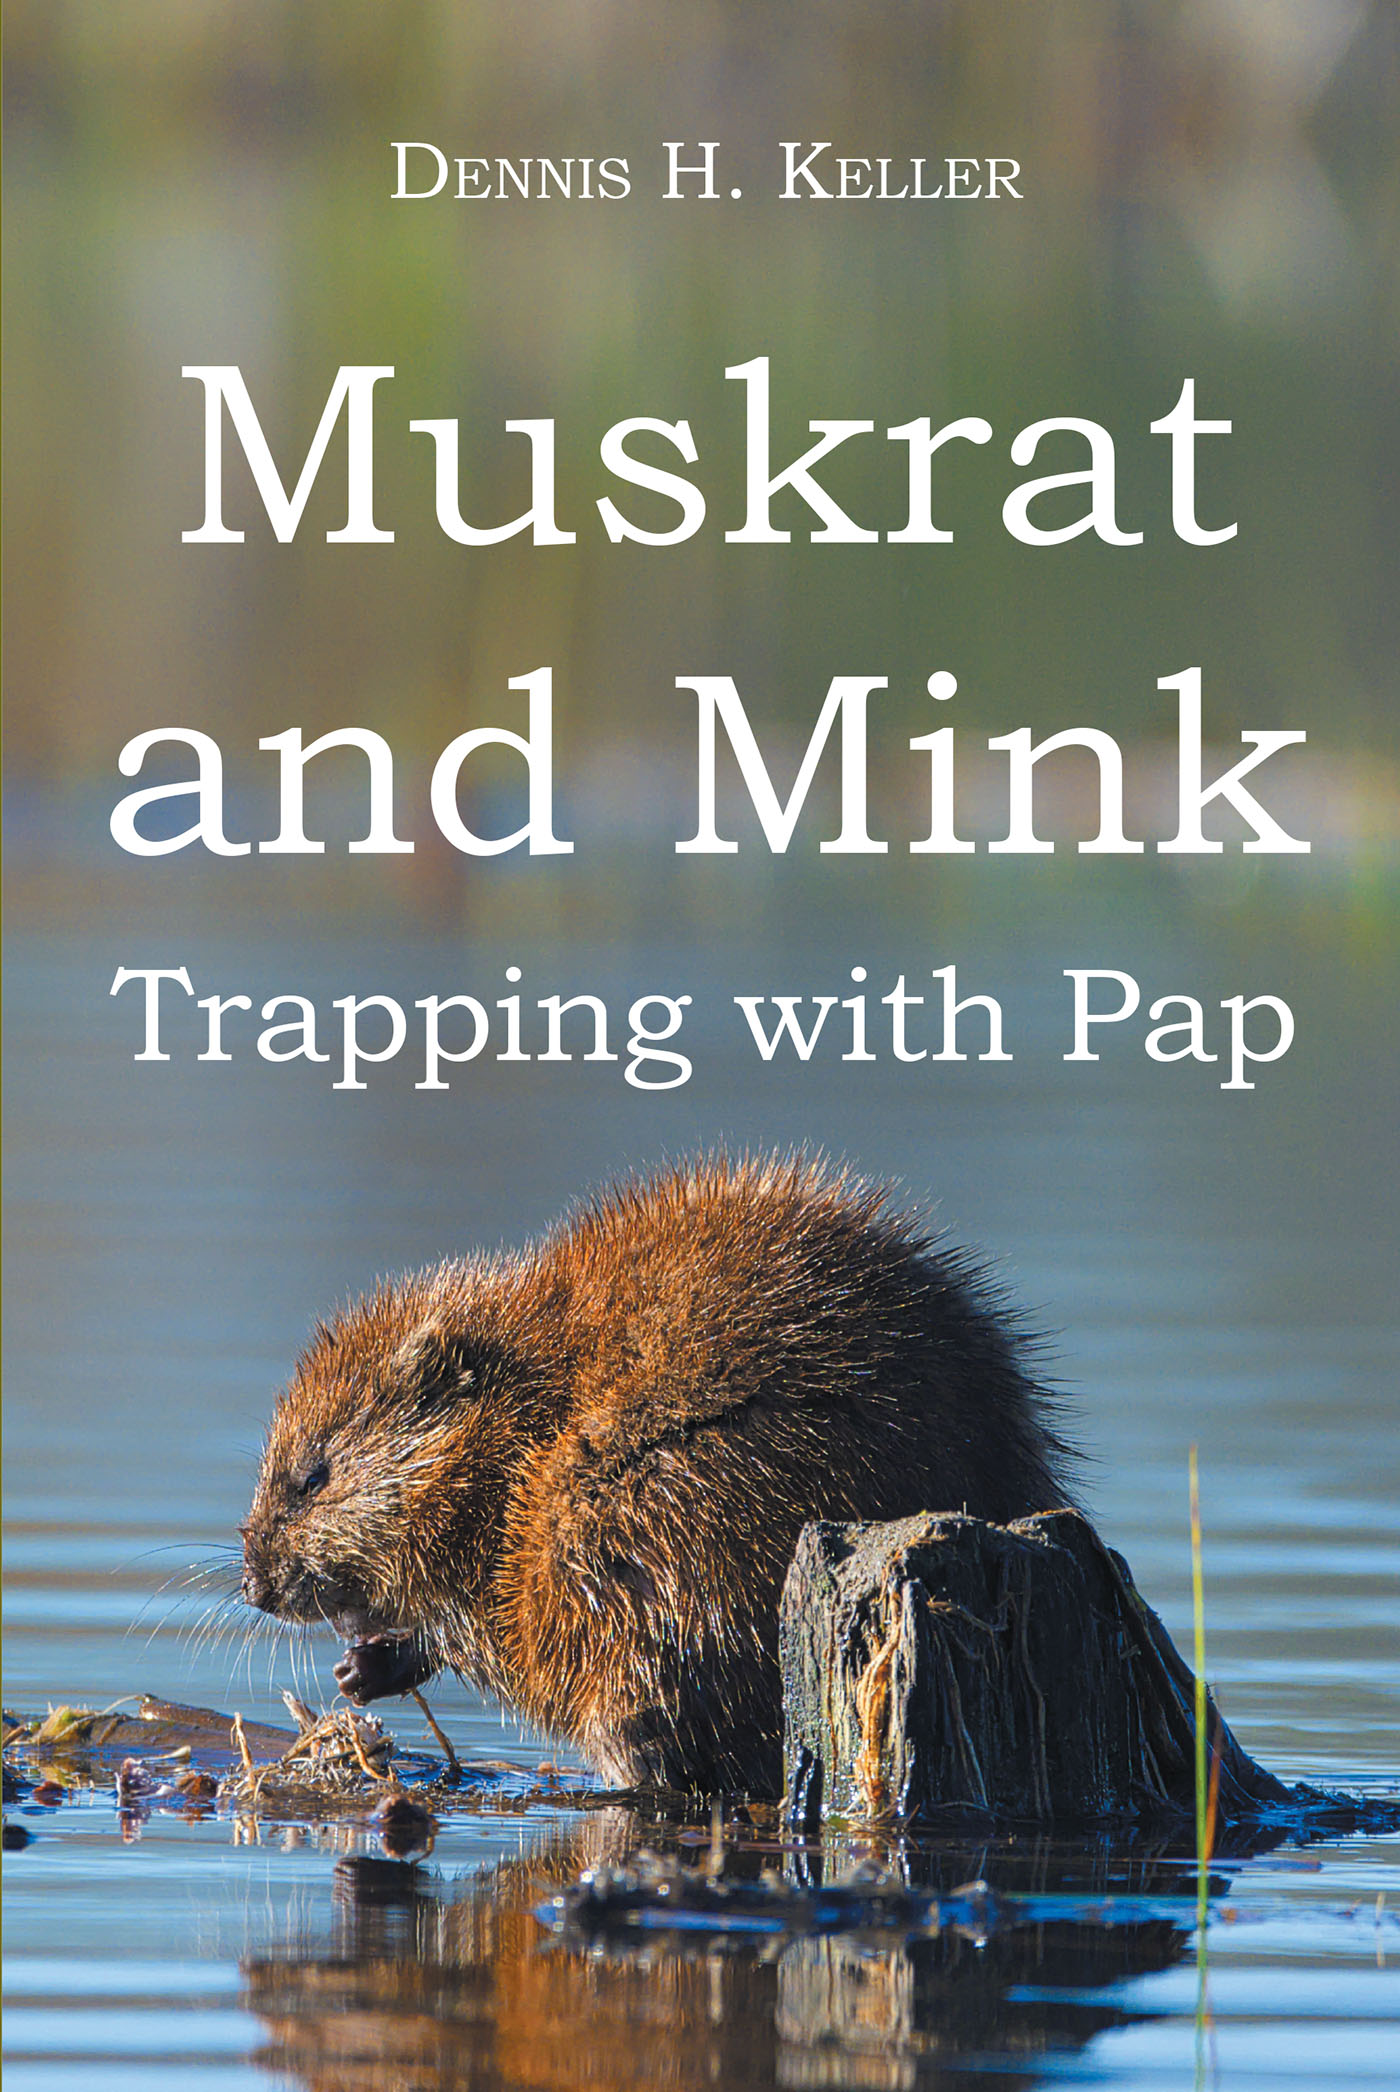 Author Dennis Keller’s New Book, "Muskrat and Mink: Trapping with Pap," Follows a Young Boy and His Grandfather Who Bond Over Trapping Muskrats and Mink Together